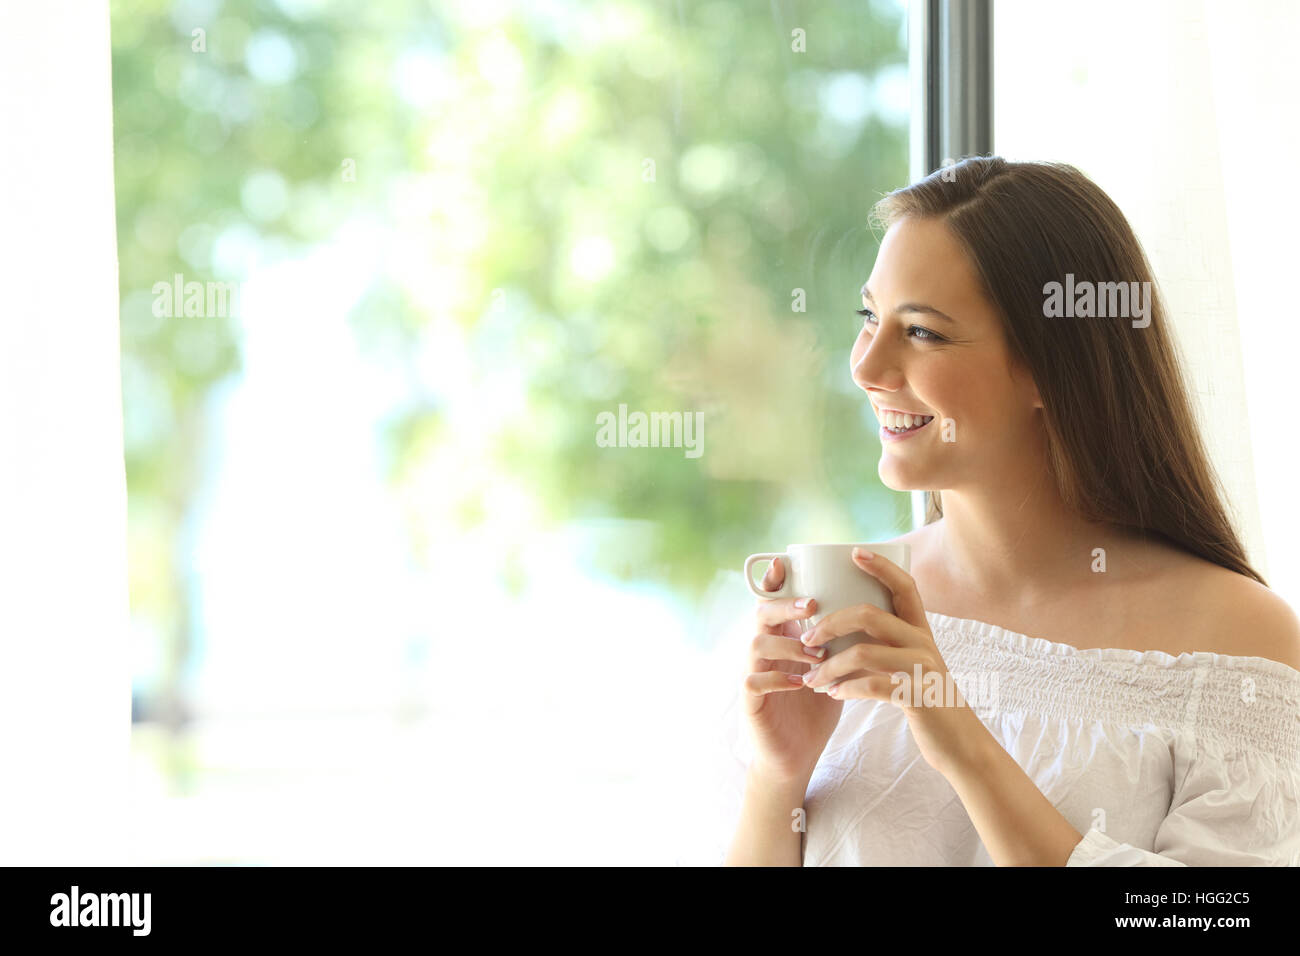 One beautiful girl tasting coffee at home and looking at horizon through a window with a green background outdoors Stock Photo